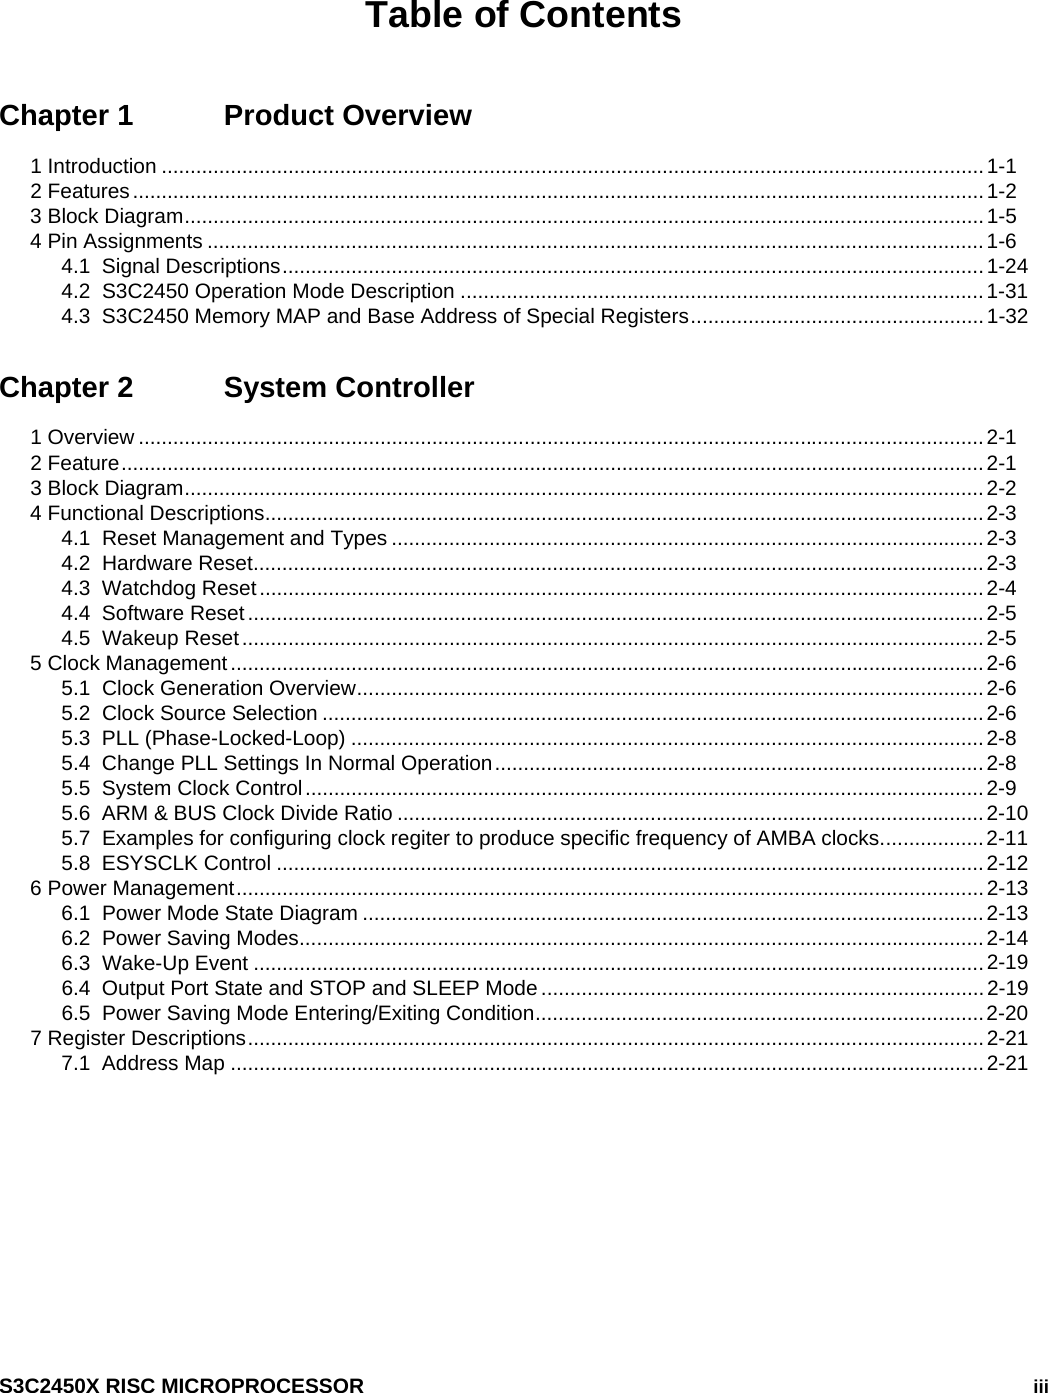    S3C2450X RISC MICROPROCESSOR   iii Table of Contents Chapter 1  Product Overview 1 Introduction ...............................................................................................................................................1-1 2 Features....................................................................................................................................................1-2 3 Block Diagram...........................................................................................................................................1-5 4 Pin Assignments .......................................................................................................................................1-6 4.1  Signal Descriptions..........................................................................................................................1-24 4.2  S3C2450 Operation Mode Description ...........................................................................................1-31 4.3  S3C2450 Memory MAP and Base Address of Special Registers...................................................1-32 Chapter 2  System Controller 1 Overview ...................................................................................................................................................2-1 2 Feature......................................................................................................................................................2-1 3 Block Diagram...........................................................................................................................................2-2 4 Functional Descriptions.............................................................................................................................2-3 4.1  Reset Management and Types .......................................................................................................2-3 4.2  Hardware Reset...............................................................................................................................2-3 4.3  Watchdog Reset..............................................................................................................................2-4 4.4  Software Reset ................................................................................................................................2-5 4.5  Wakeup Reset.................................................................................................................................2-5 5 Clock Management...................................................................................................................................2-6 5.1  Clock Generation Overview.............................................................................................................2-6 5.2  Clock Source Selection ...................................................................................................................2-6 5.3  PLL (Phase-Locked-Loop) ..............................................................................................................2-8 5.4  Change PLL Settings In Normal Operation.....................................................................................2-8 5.5  System Clock Control......................................................................................................................2-9 5.6  ARM &amp; BUS Clock Divide Ratio ......................................................................................................2-10 5.7  Examples for configuring clock regiter to produce specific frequency of AMBA clocks..................2-11 5.8  ESYSCLK Control ...........................................................................................................................2-12 6 Power Management..................................................................................................................................2-13 6.1  Power Mode State Diagram ............................................................................................................2-13 6.2  Power Saving Modes.......................................................................................................................2-14 6.3  Wake-Up Event ...............................................................................................................................2-19 6.4  Output Port State and STOP and SLEEP Mode .............................................................................2-19 6.5  Power Saving Mode Entering/Exiting Condition..............................................................................2-20 7 Register Descriptions................................................................................................................................2-21 7.1  Address Map ...................................................................................................................................2-21 